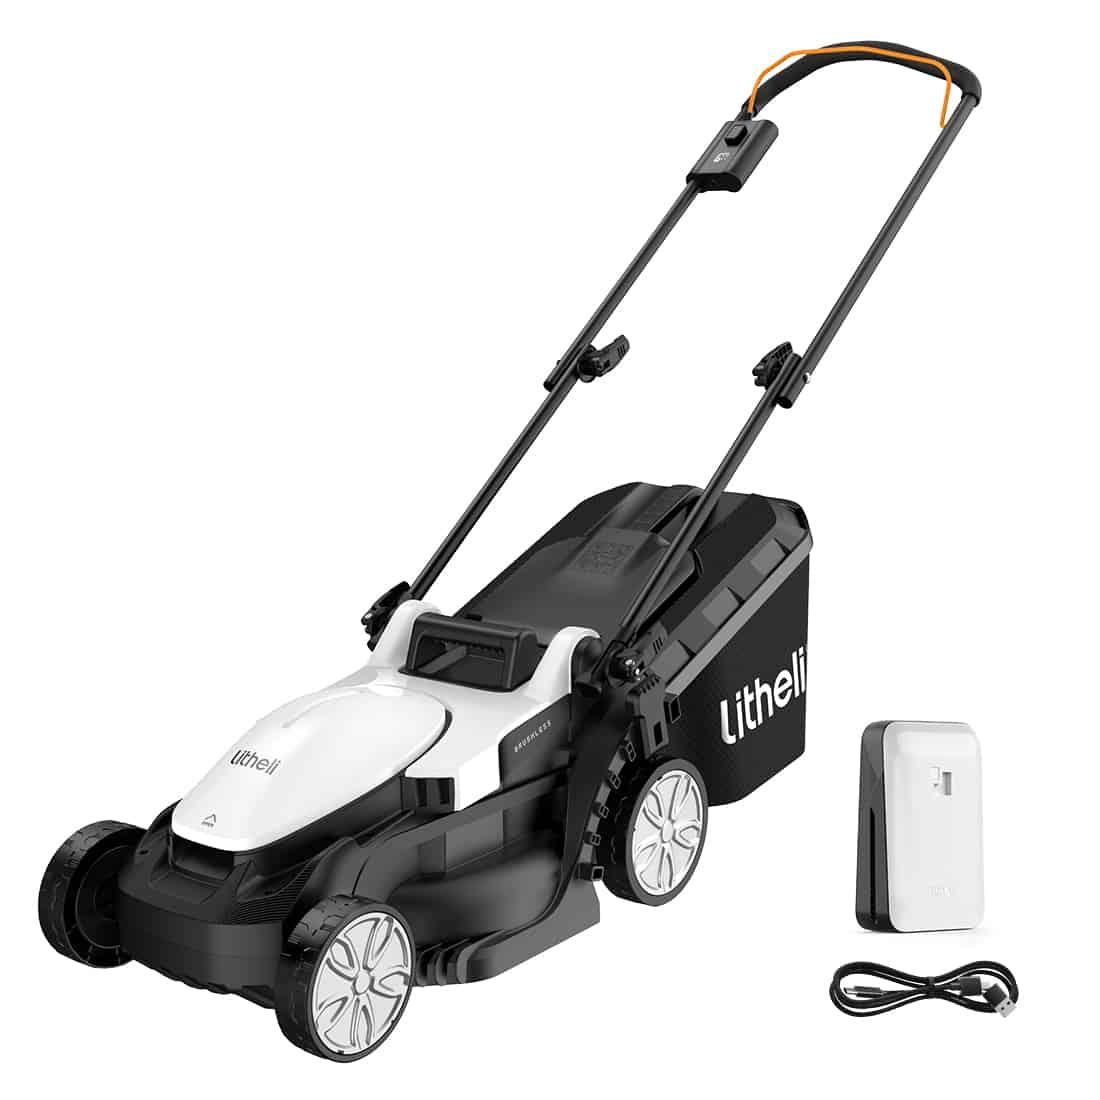 Litheli U20 2*20V Cordless Electric Snow Blower with Brushless Motor